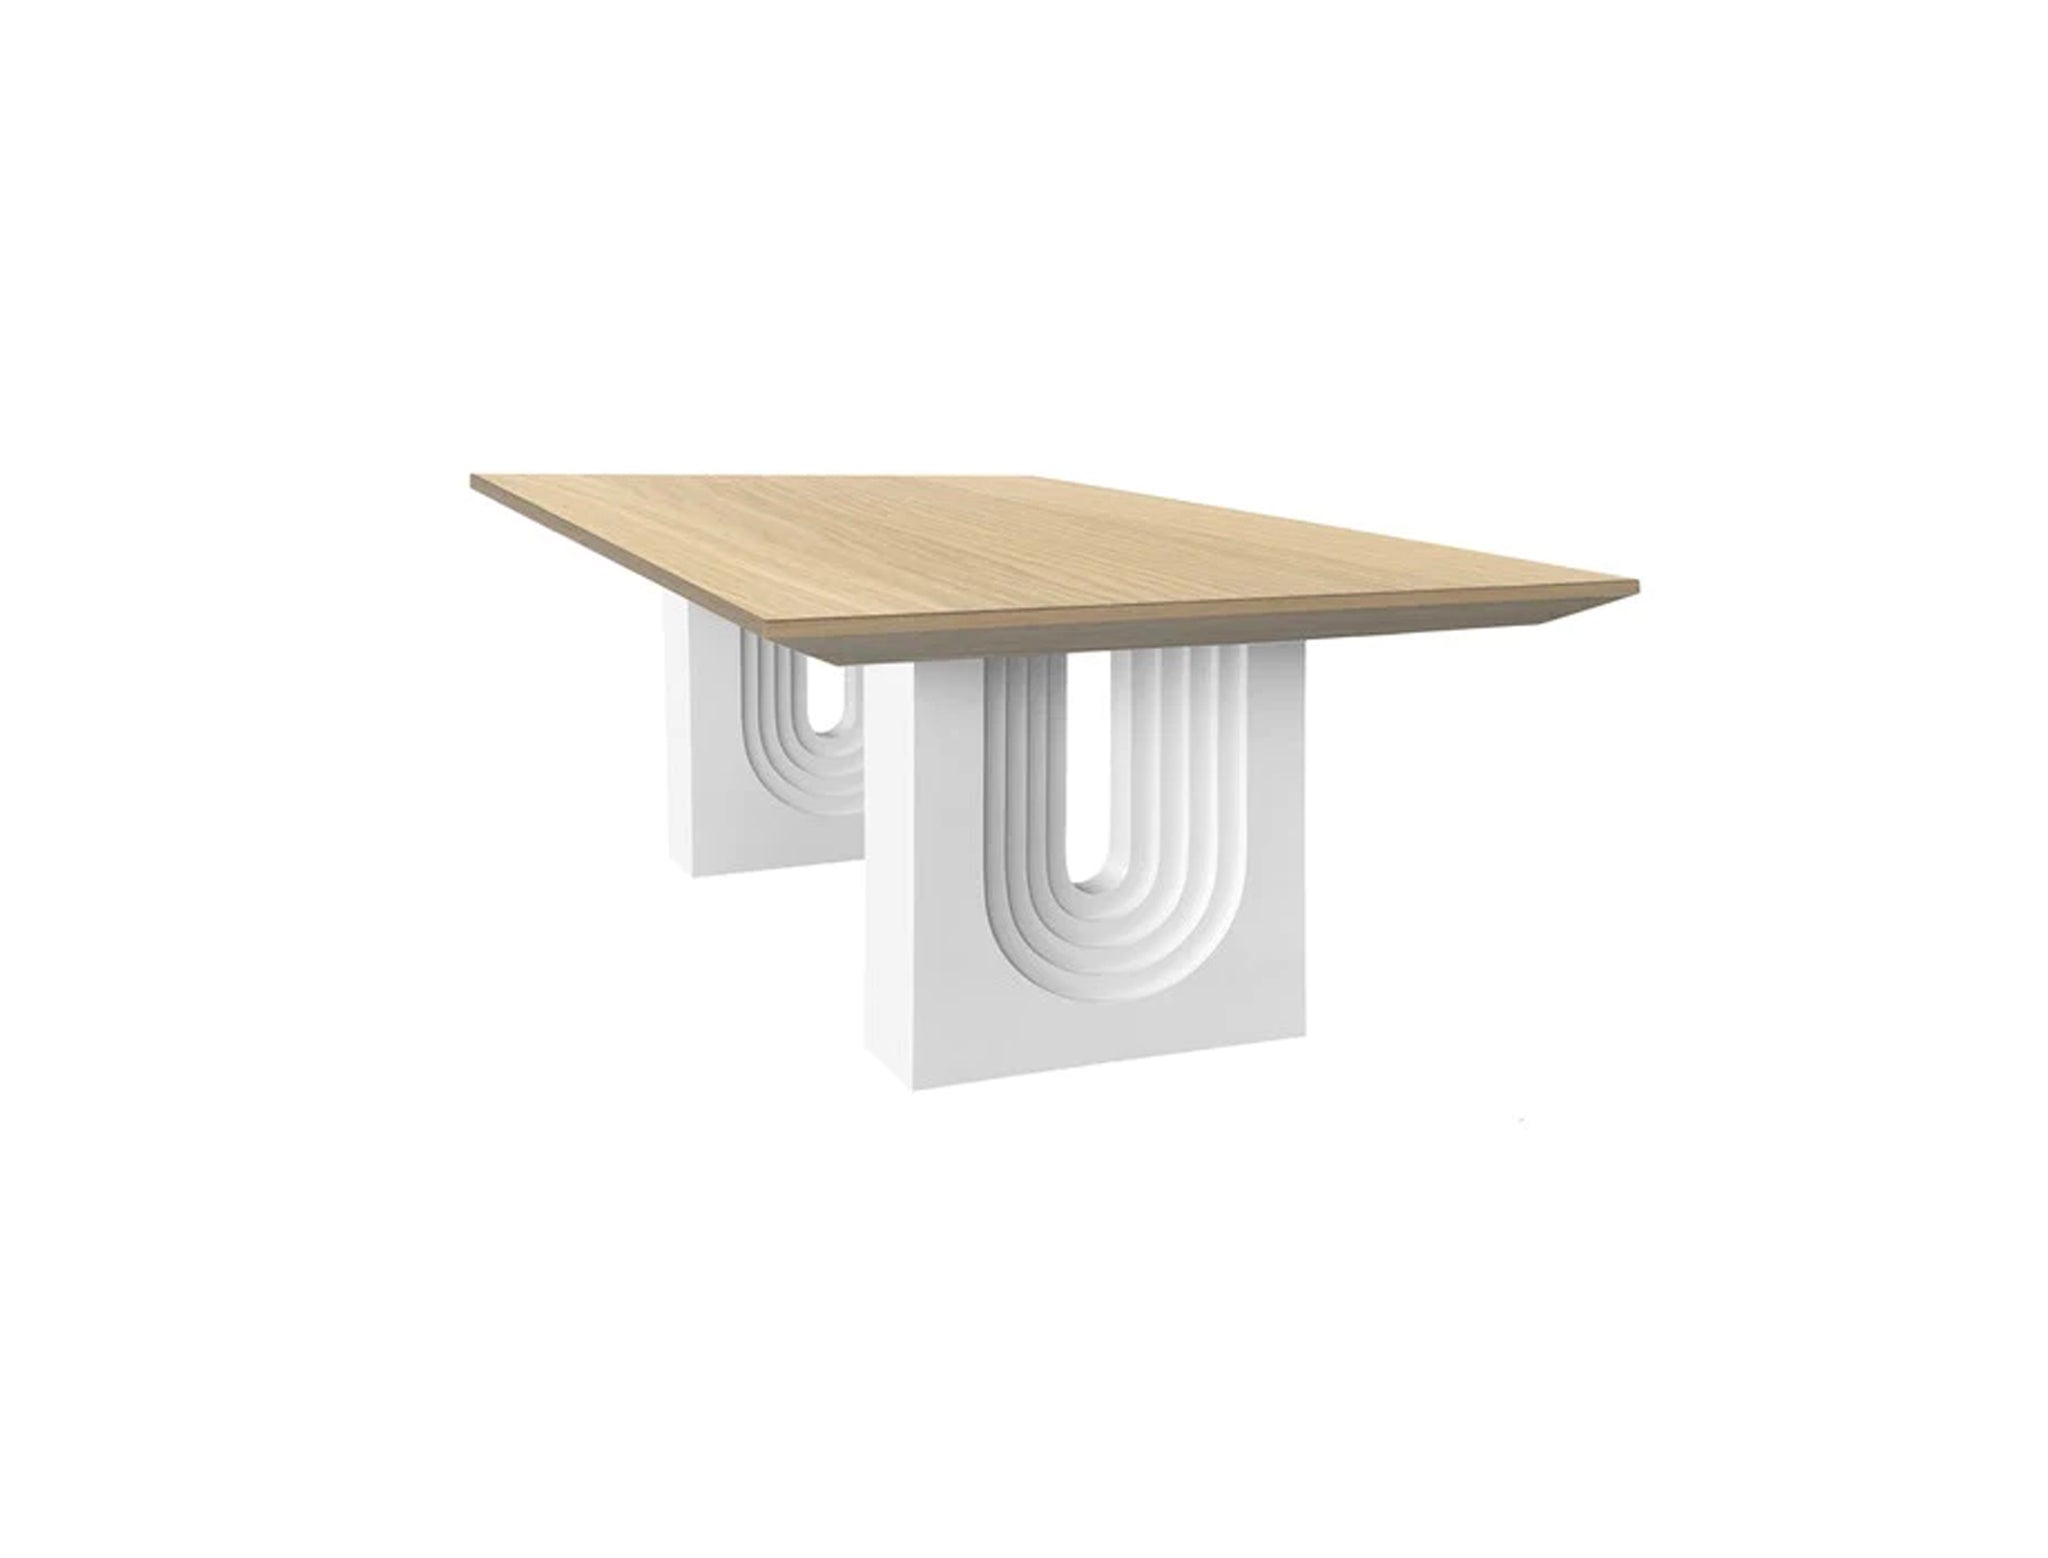 Arch Dining Table by Ryan Saghian